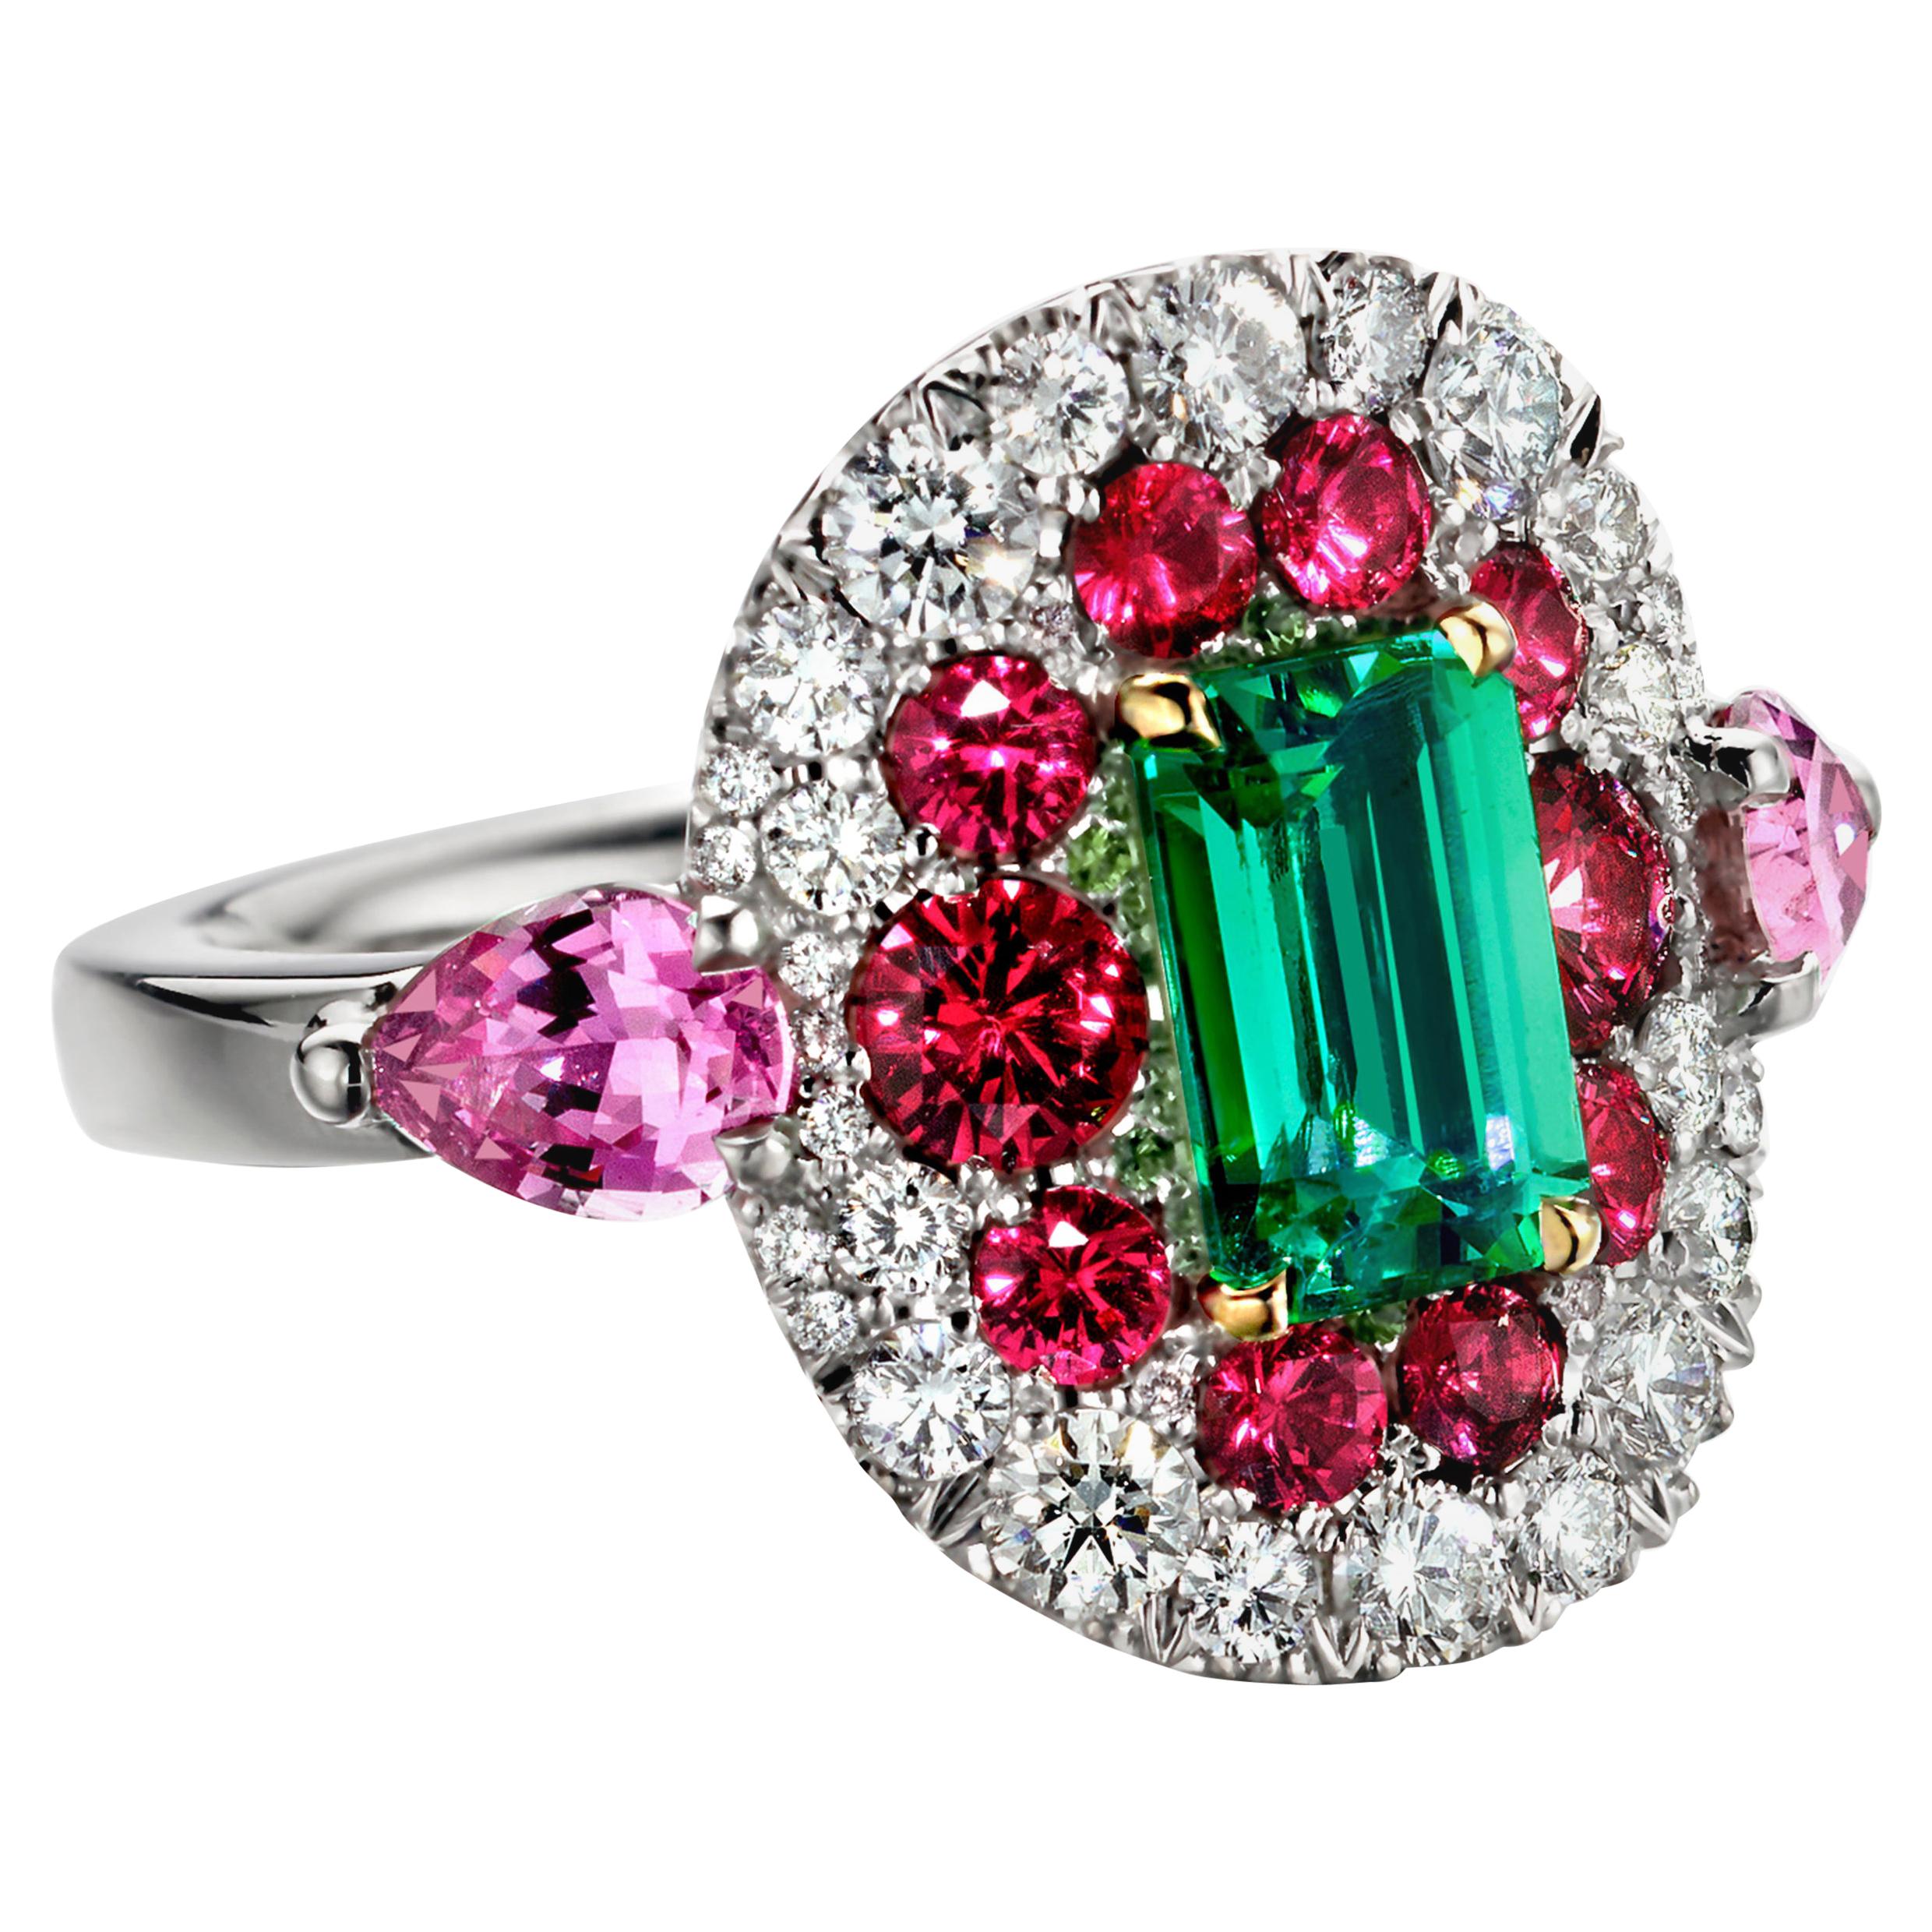 1.10 Carat Emerald, Red Spinel and Pink Sapphire Ring